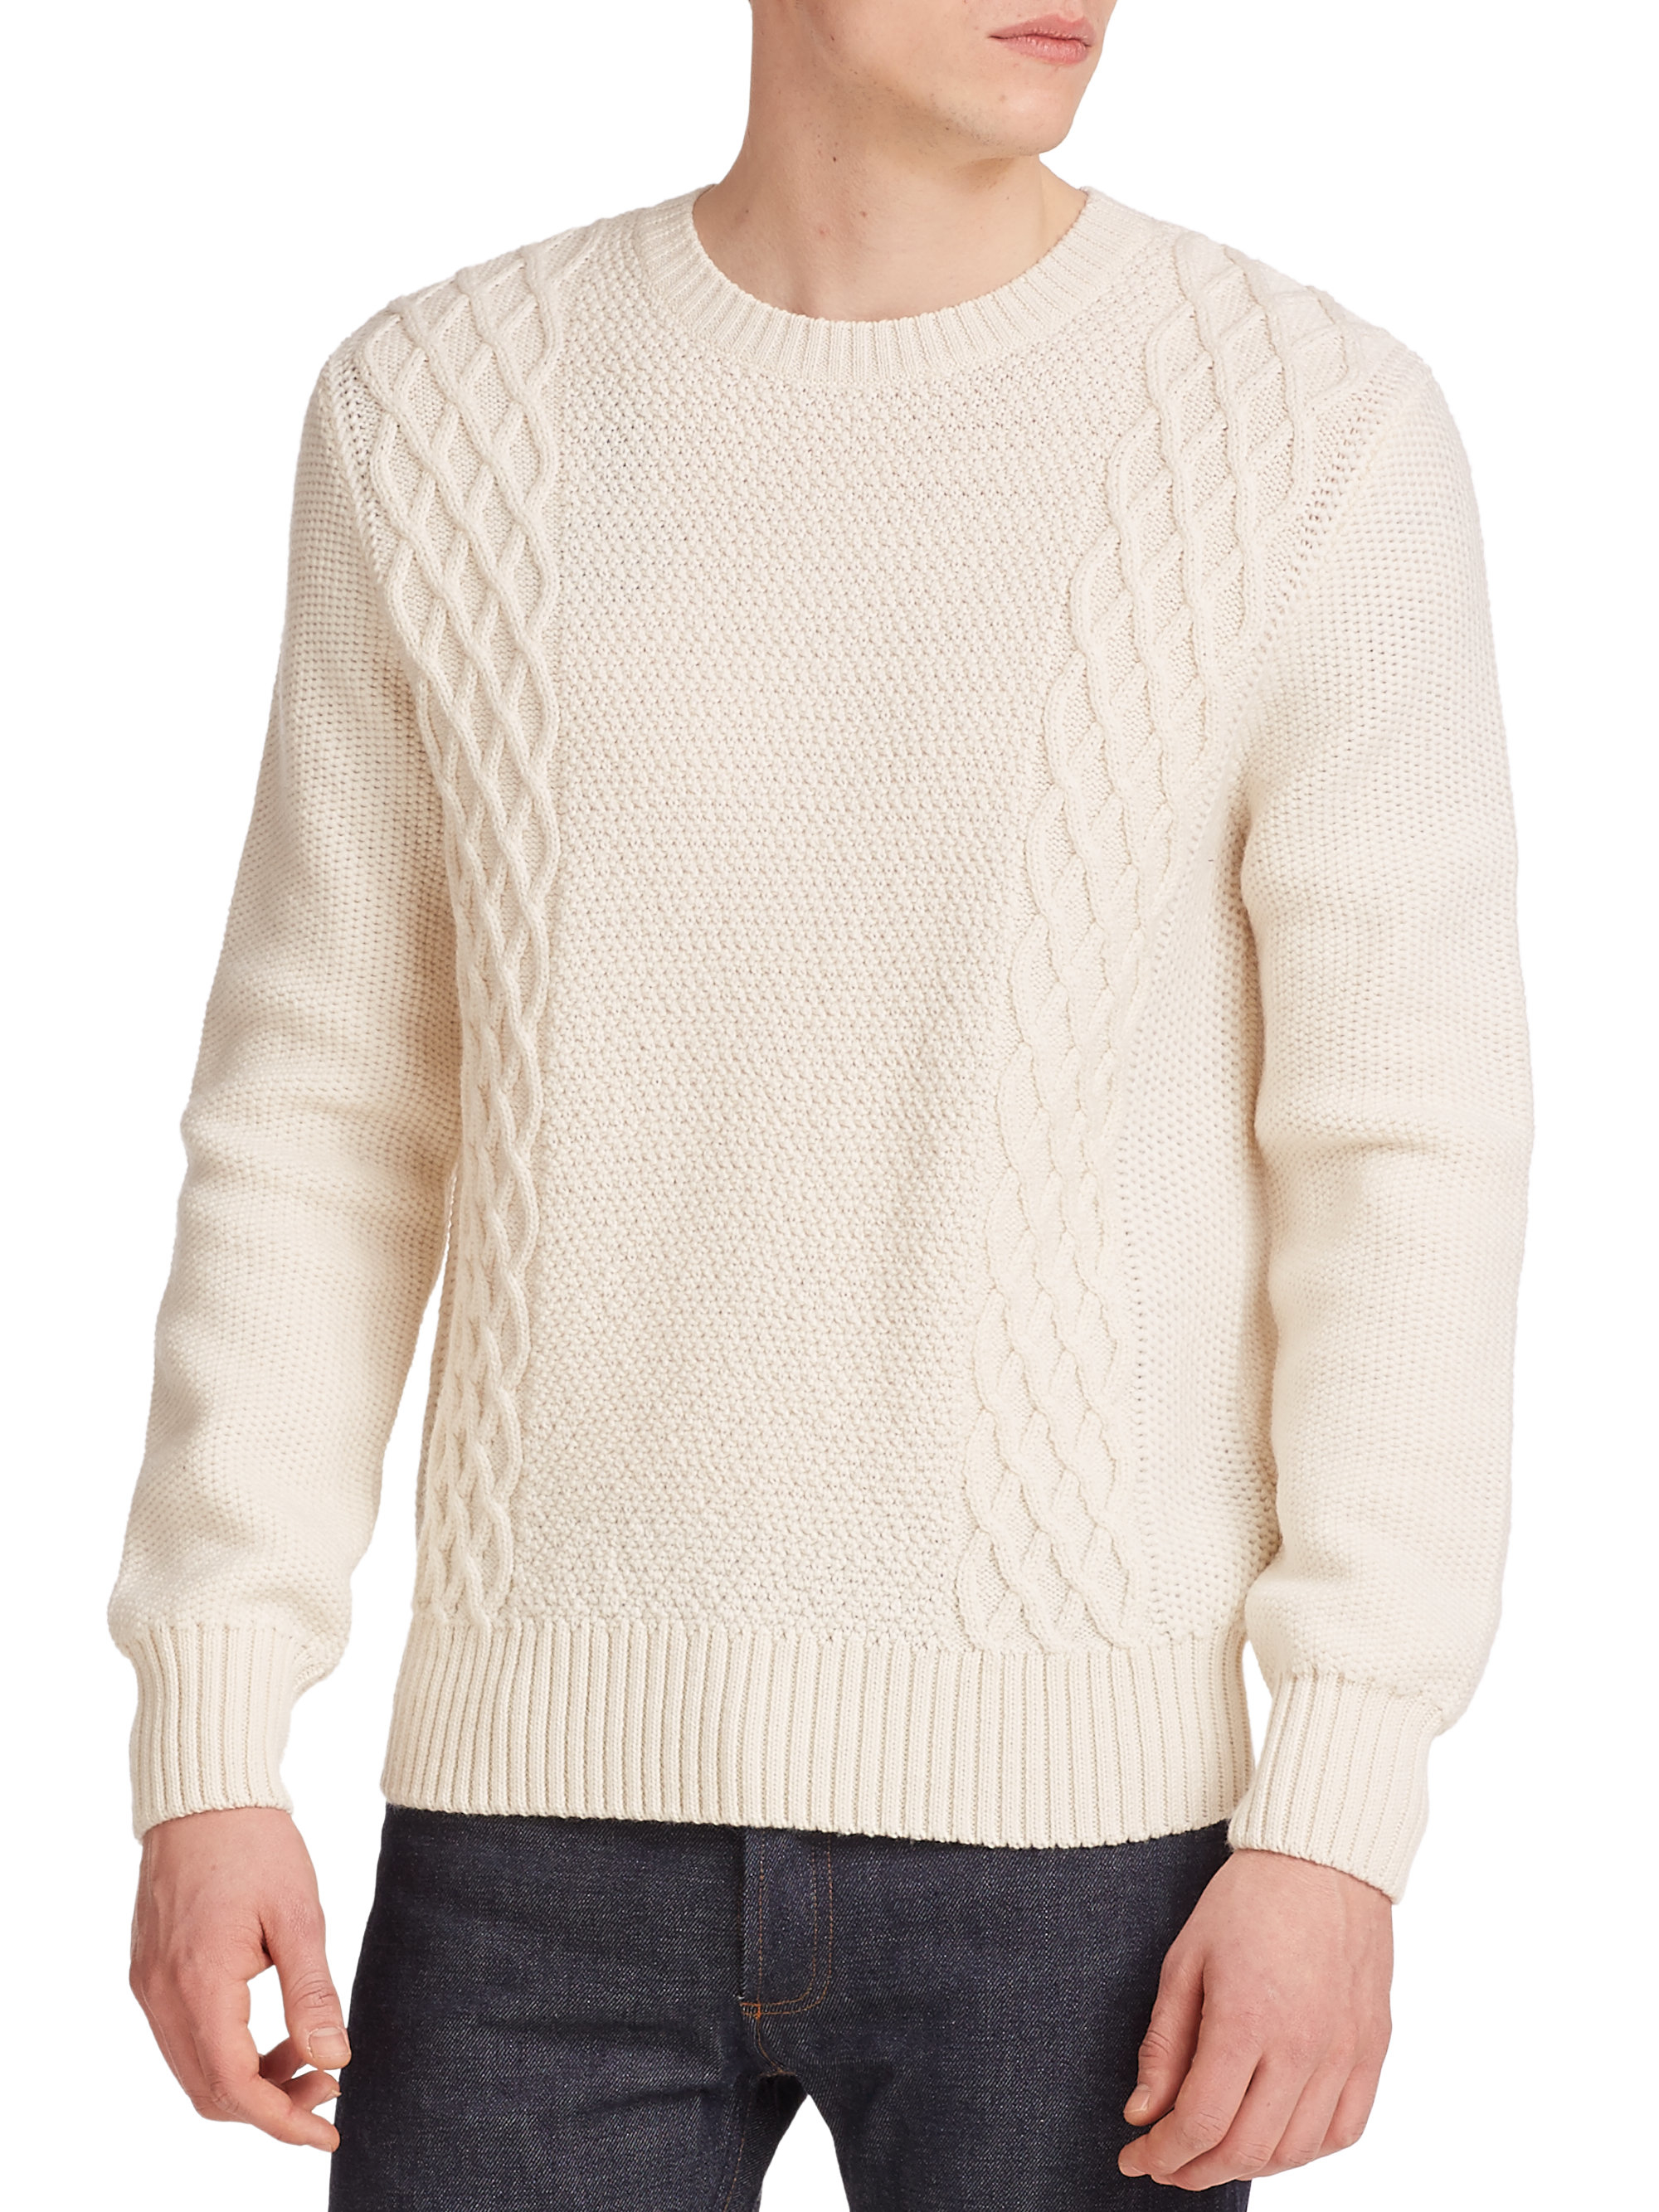 Lyst - A.P.C. Pull College Jumper Merino Wool Sweater in White for Men